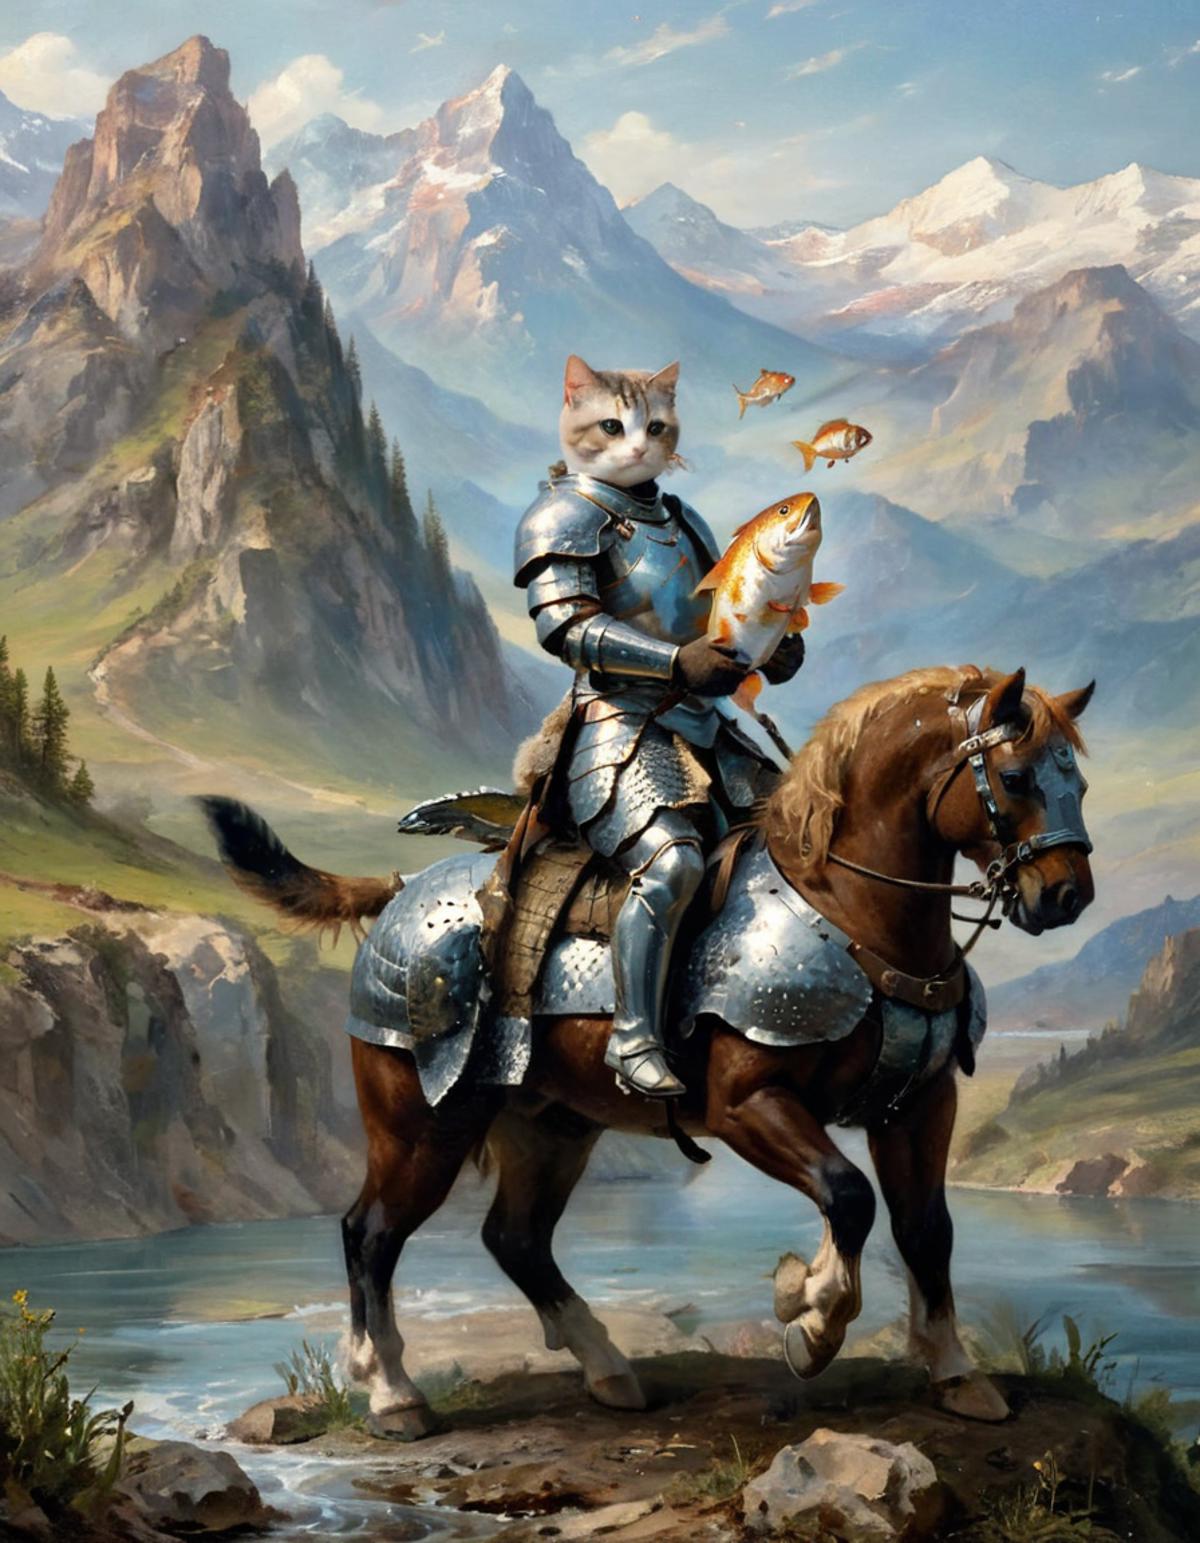 A knight in armor riding a horse and holding a fish.